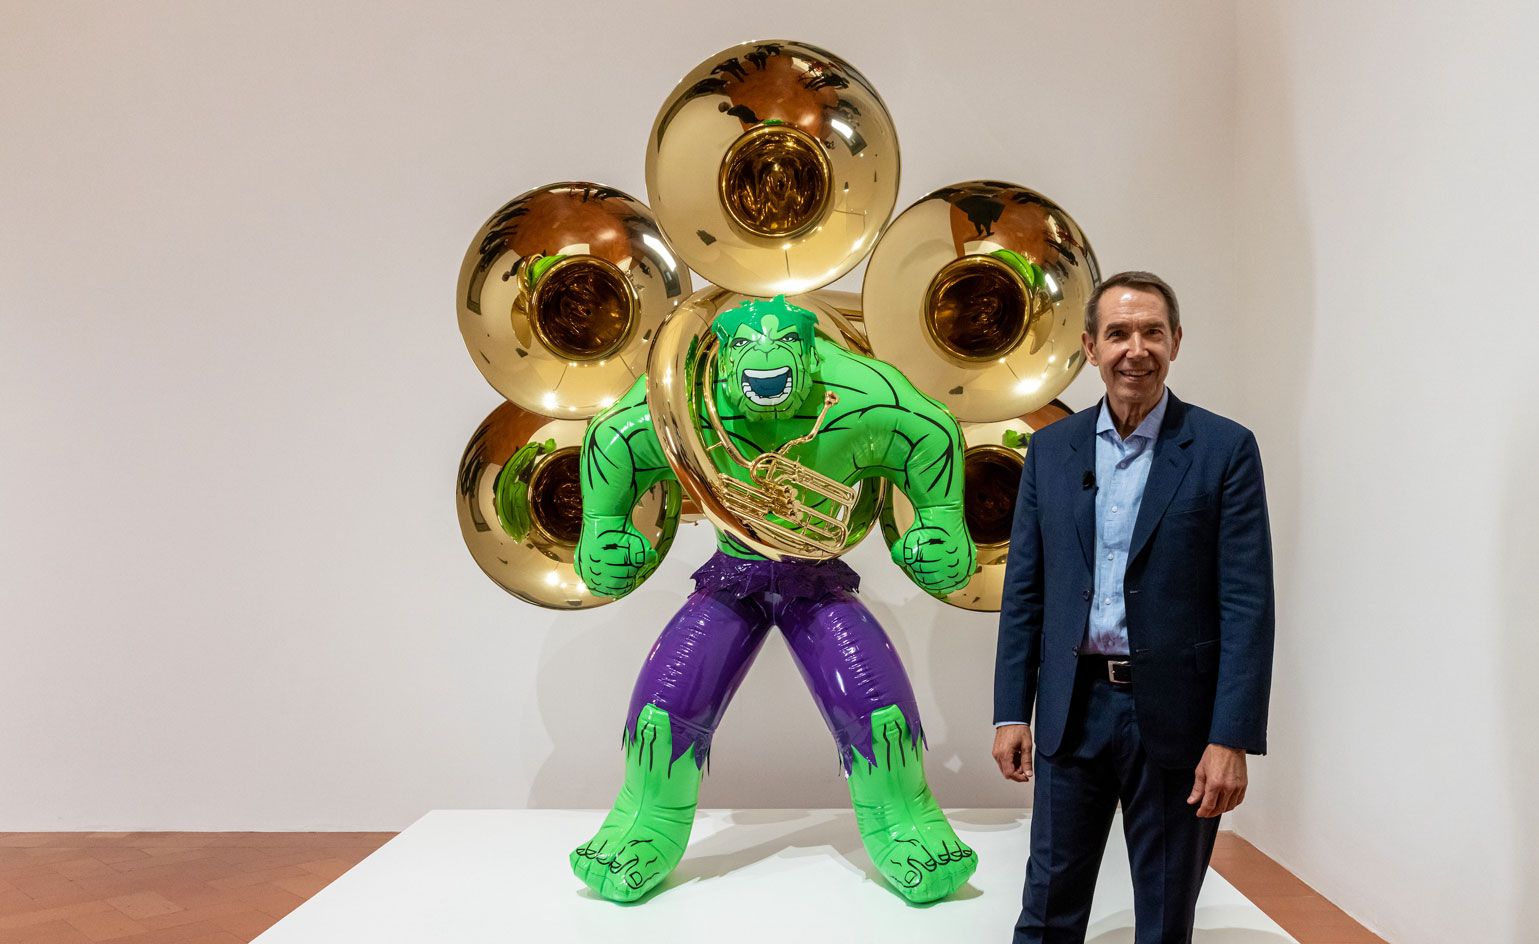 How Does Jeff Koons Make His Art?